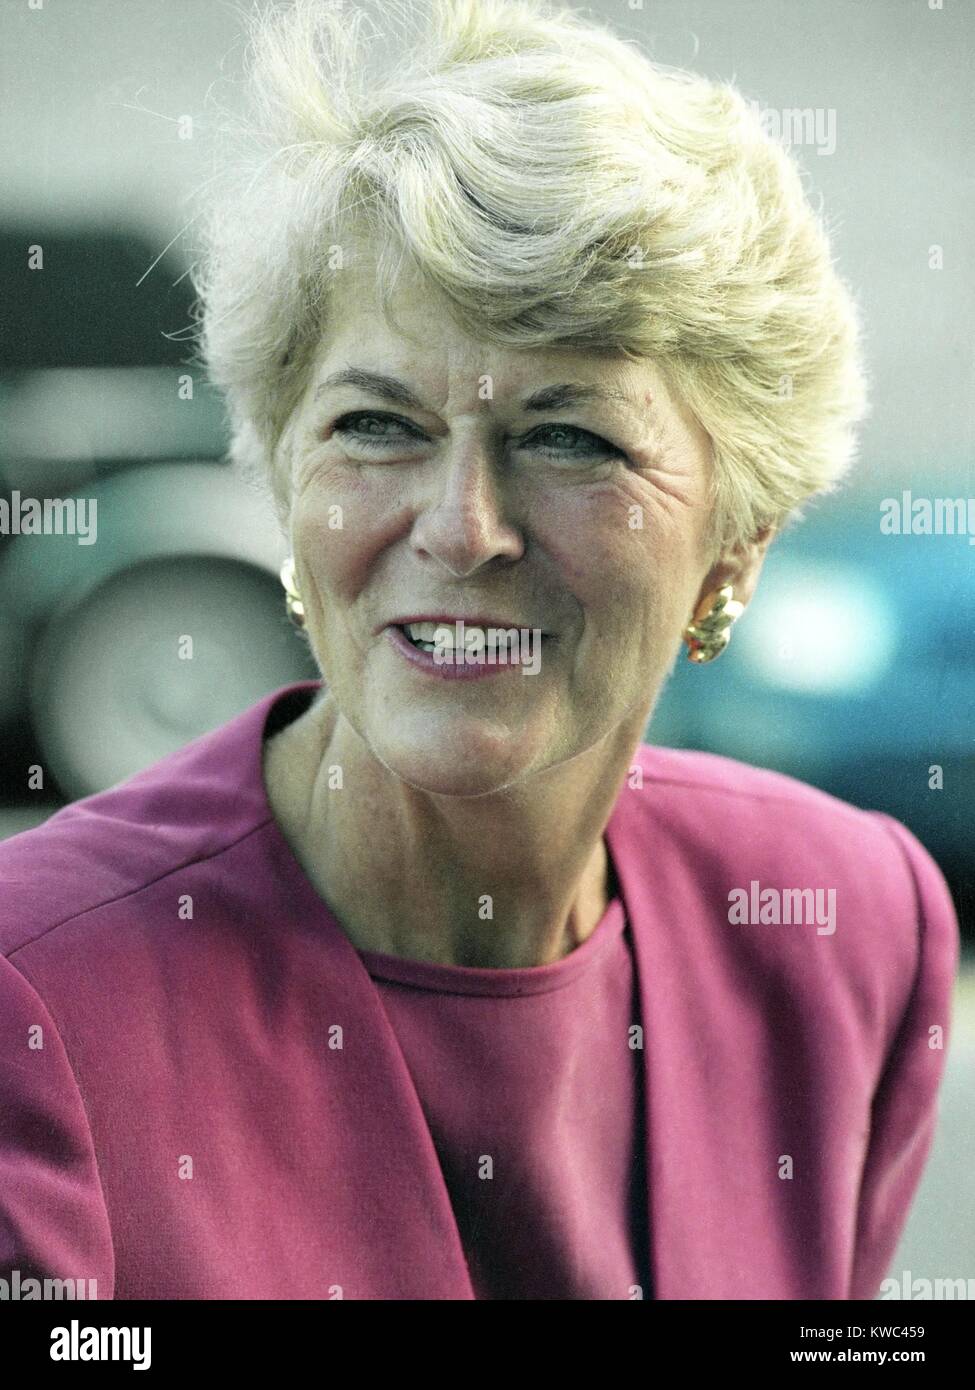 Former Congresswoman and Vice Presidential Nominee, Geraldine Ferraro in Nov. 1998. She had just published a book, FRAMING A LIFE: A FAMILY MEMOIR. (BSLOC 2015 14 83) Stock Photo